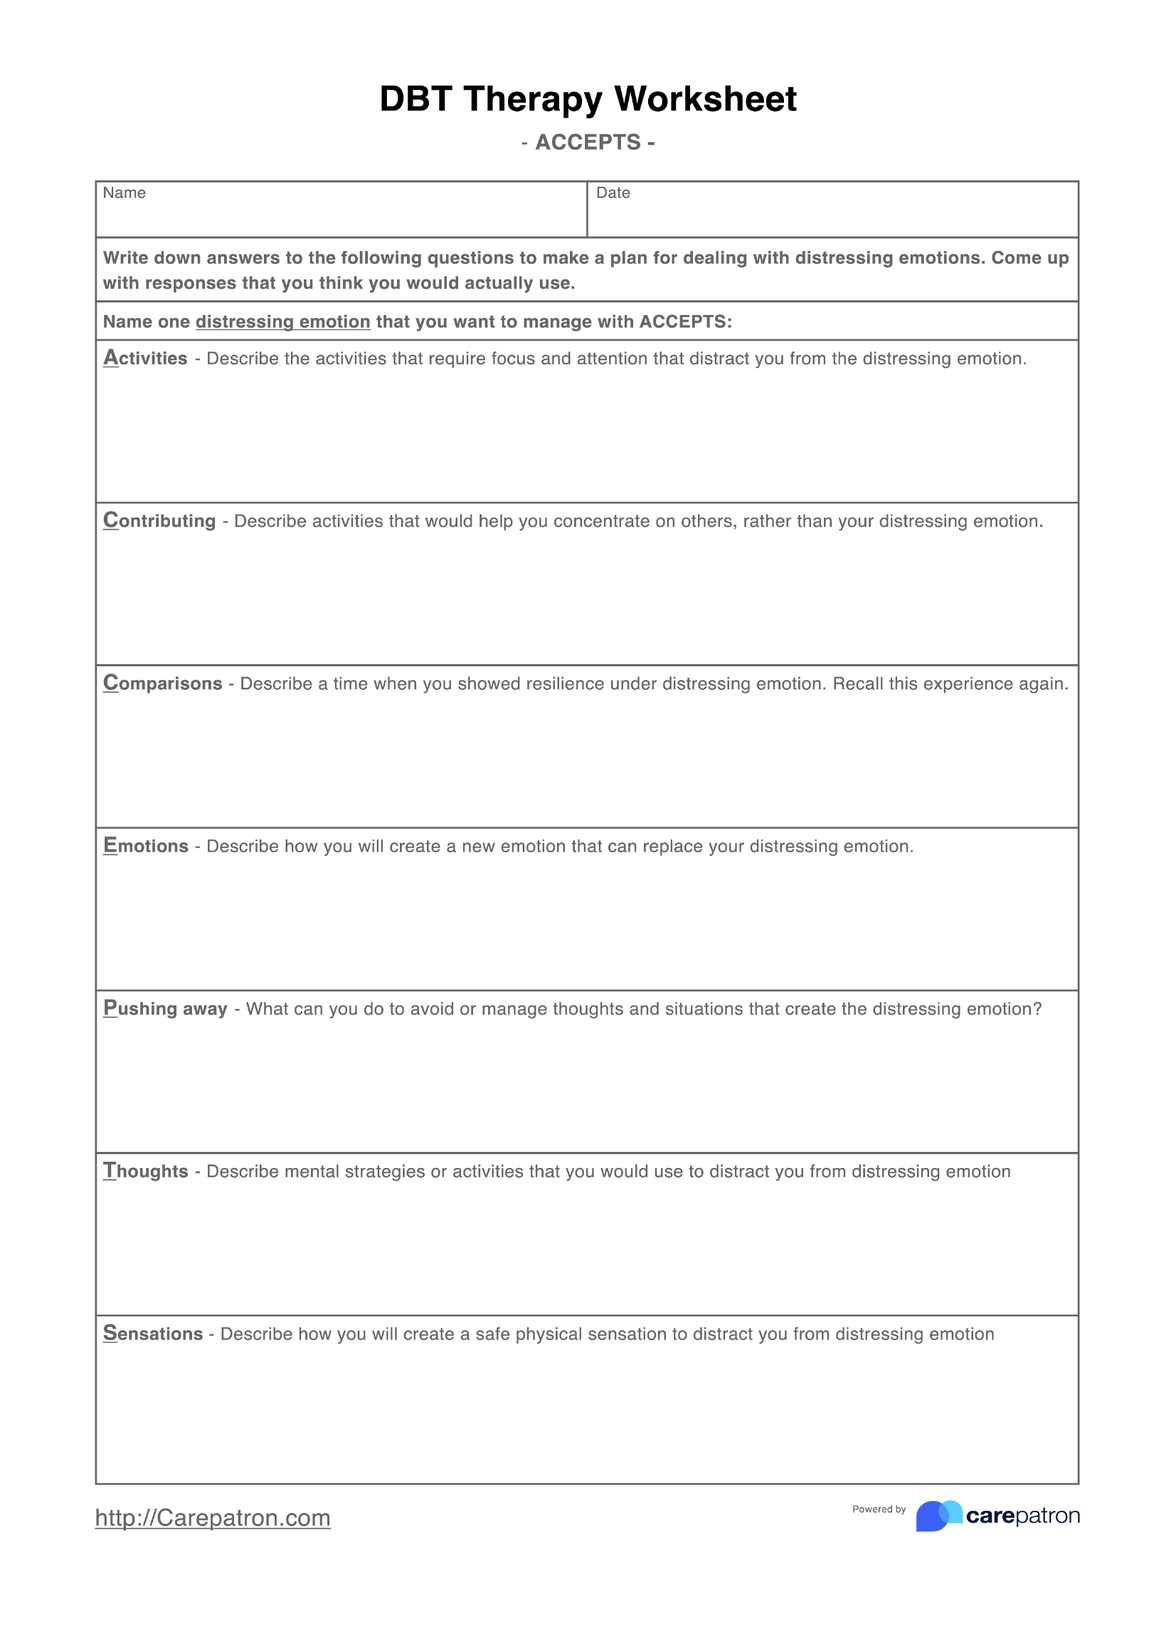 DBT Therapy Worksheet PDF Example